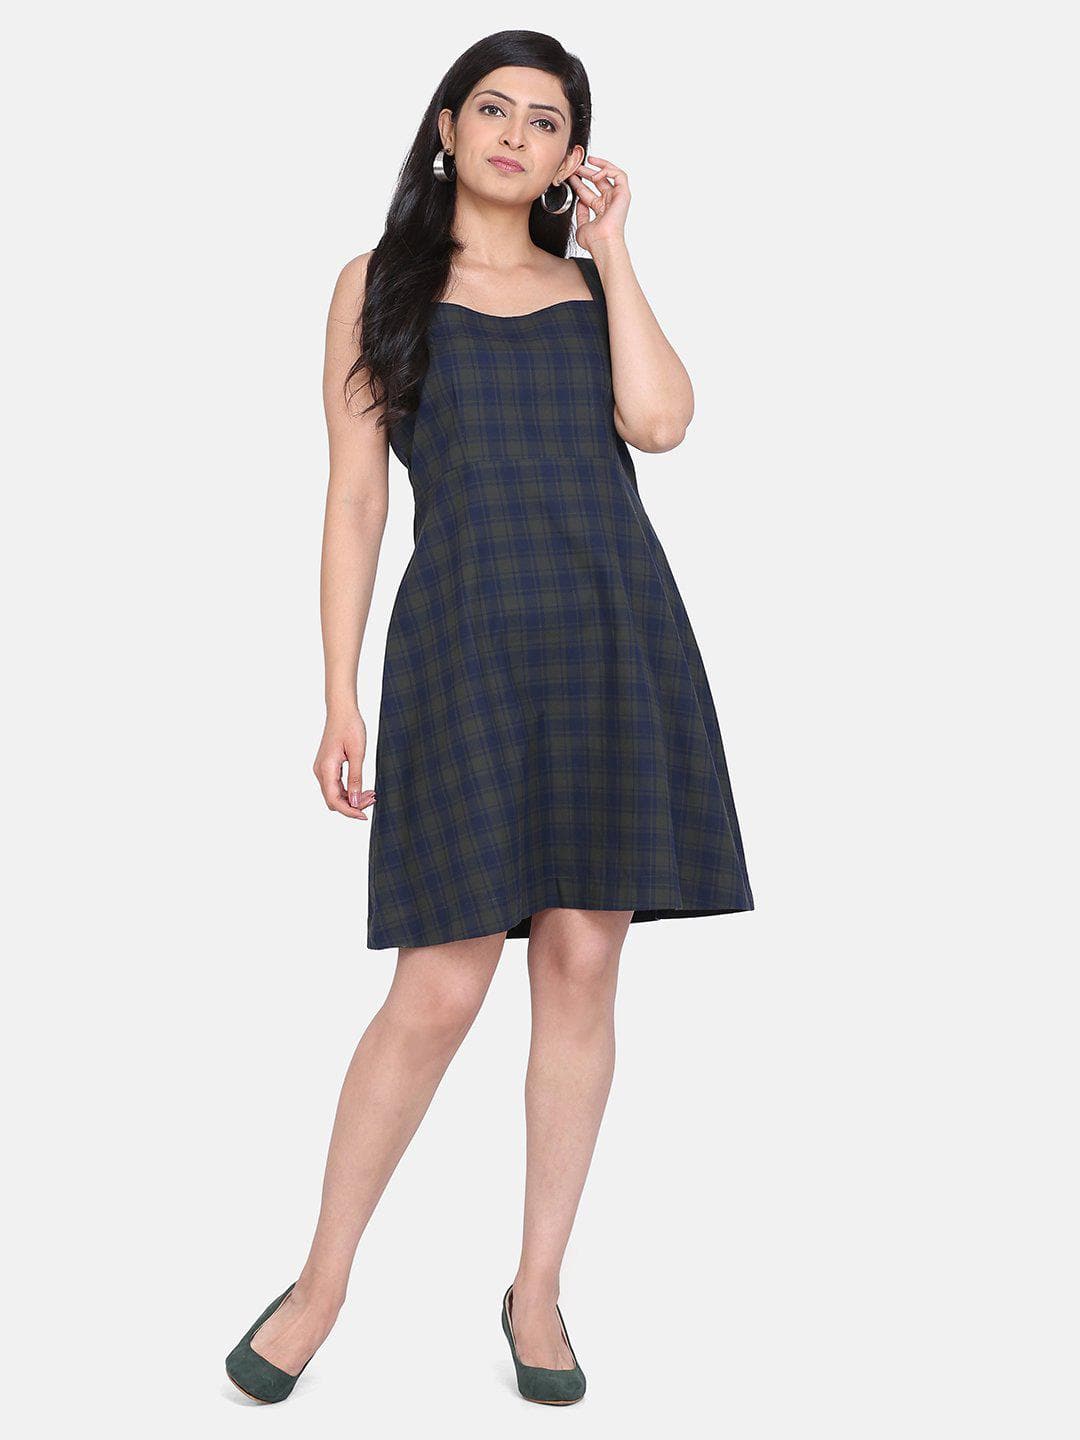 Cotton Check Dress For Women - Green and Blue